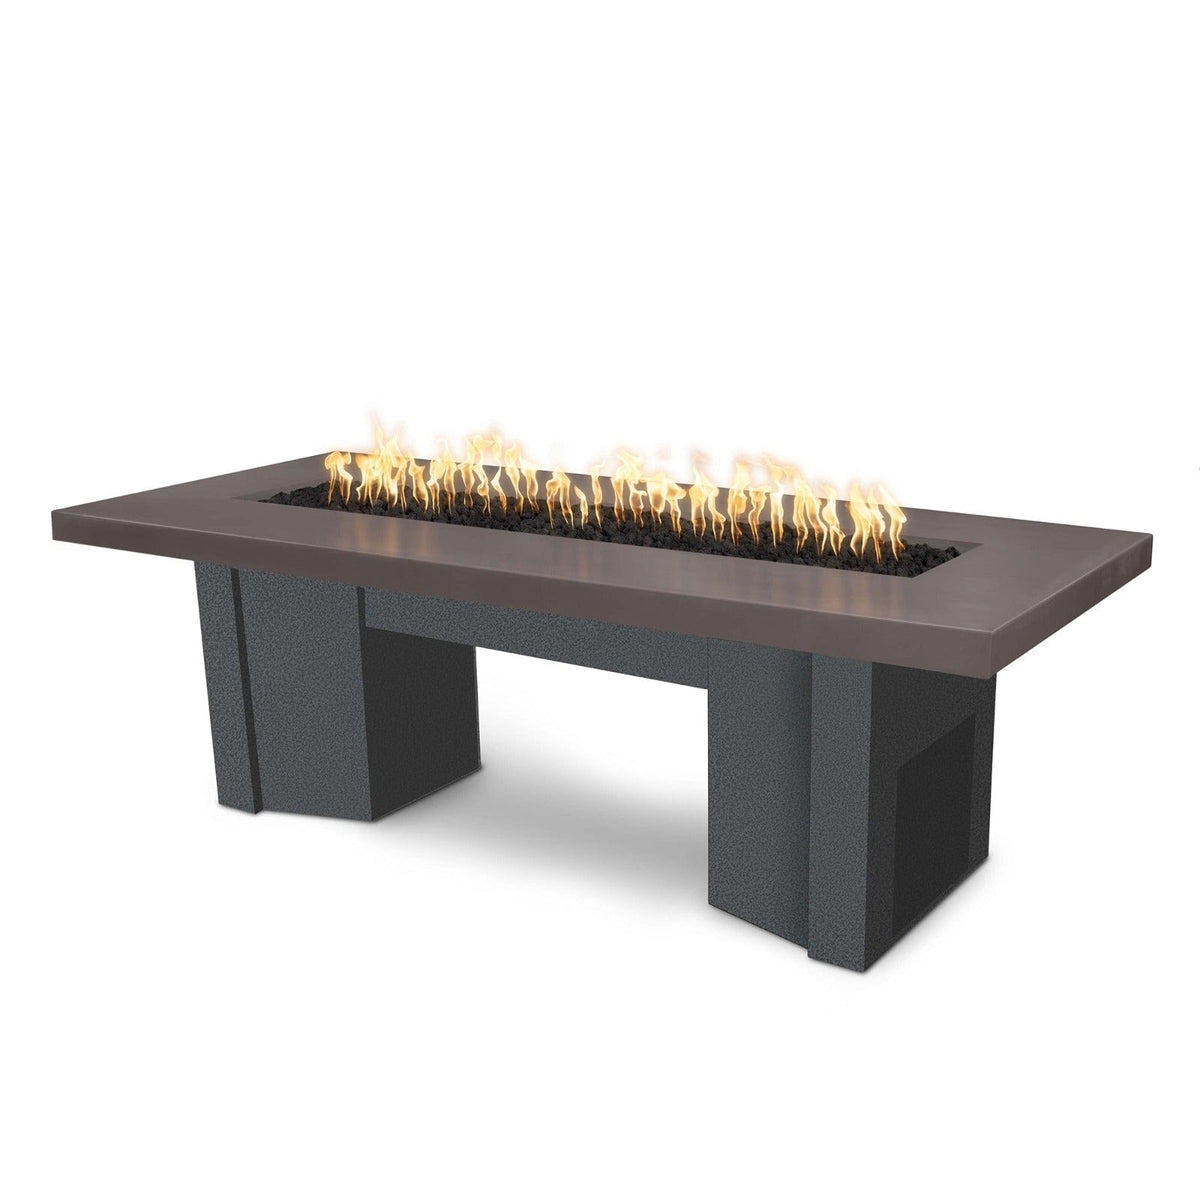 The Outdoor Plus Fire Features Chestnut (-CST) / Silver Vein Powder Coated Steel (-SLV) The Outdoor Plus 78&quot; Alameda Fire Table Smooth Concrete in Liquid Propane - 12V Electronic Ignition / OPT-ALMGFRC78E12V-LP